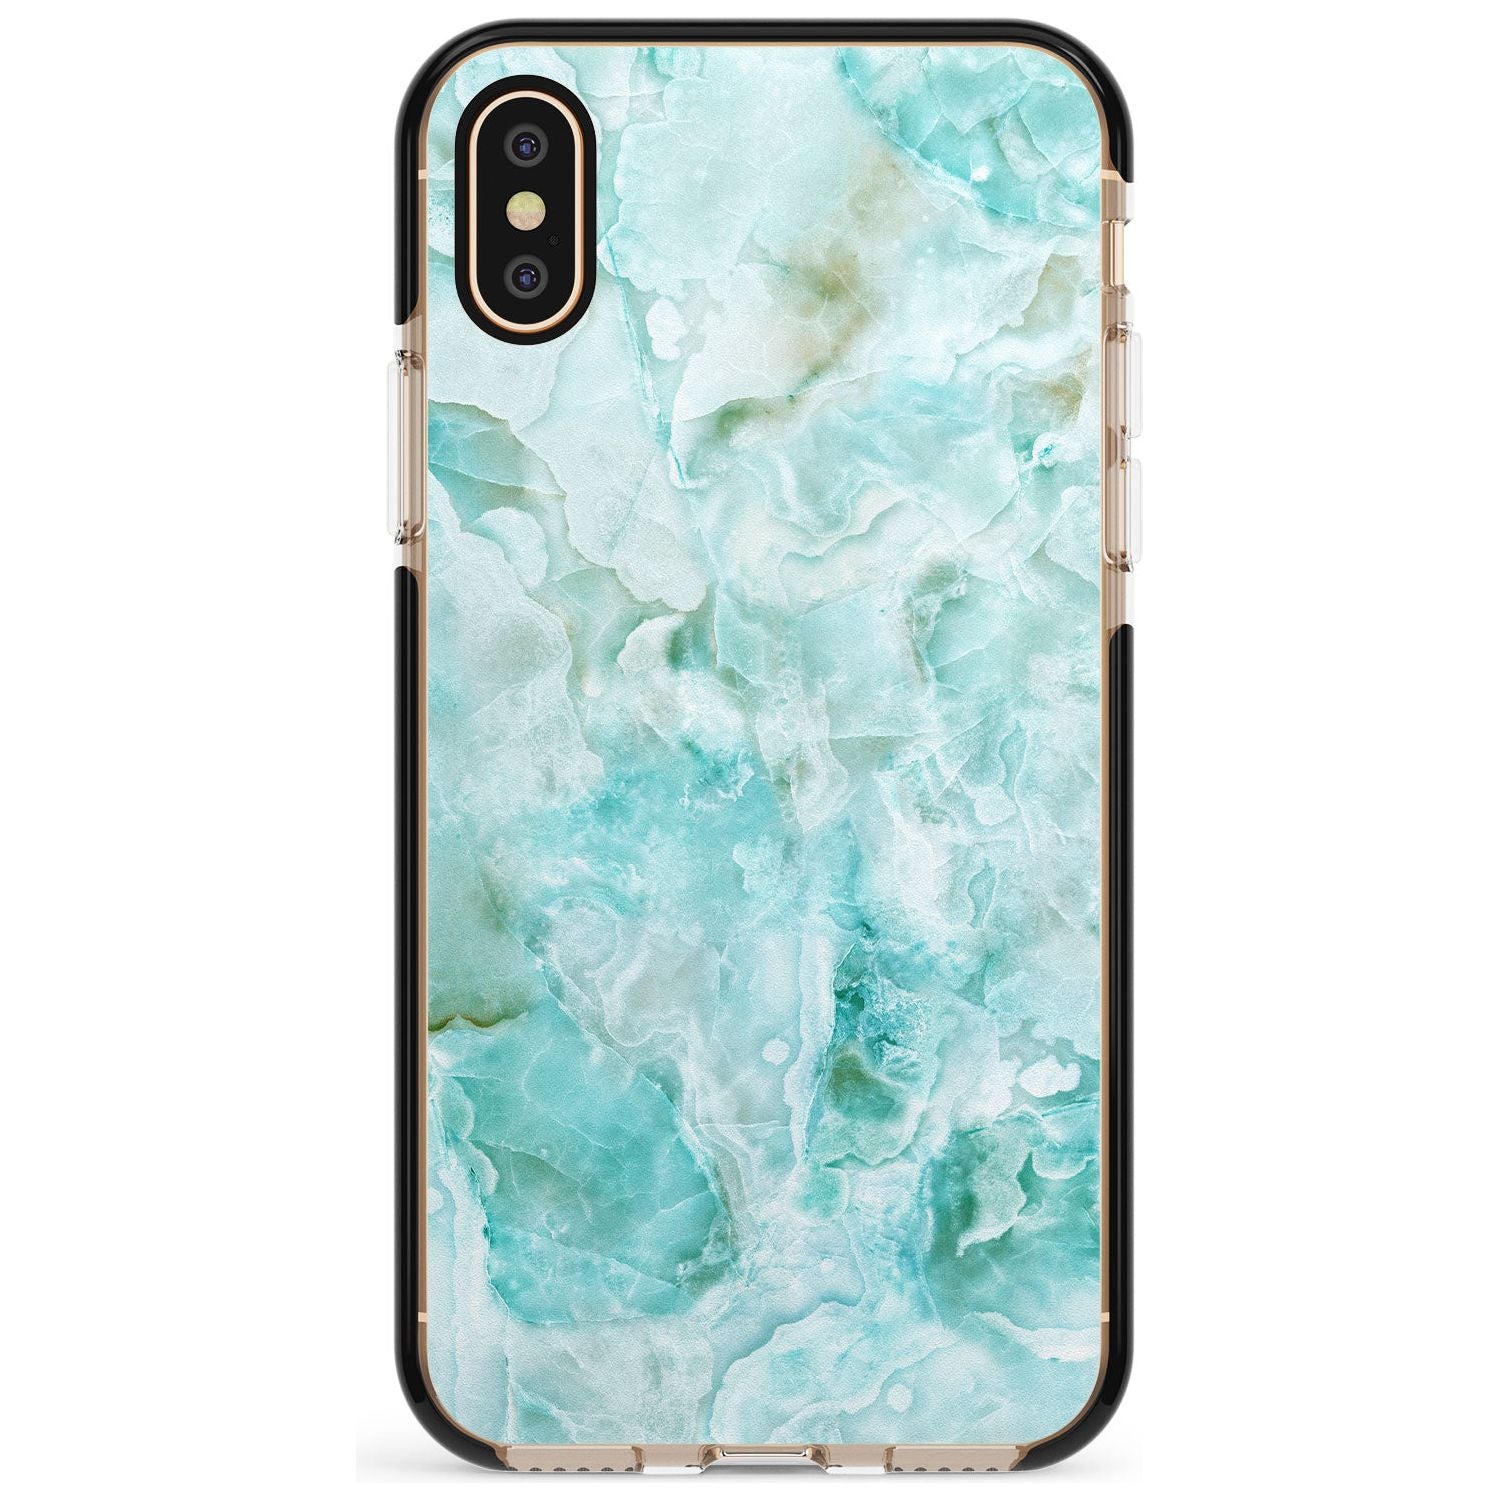 Turquoise Aqua Onyx Marble Pink Fade Impact Phone Case for iPhone X XS Max XR